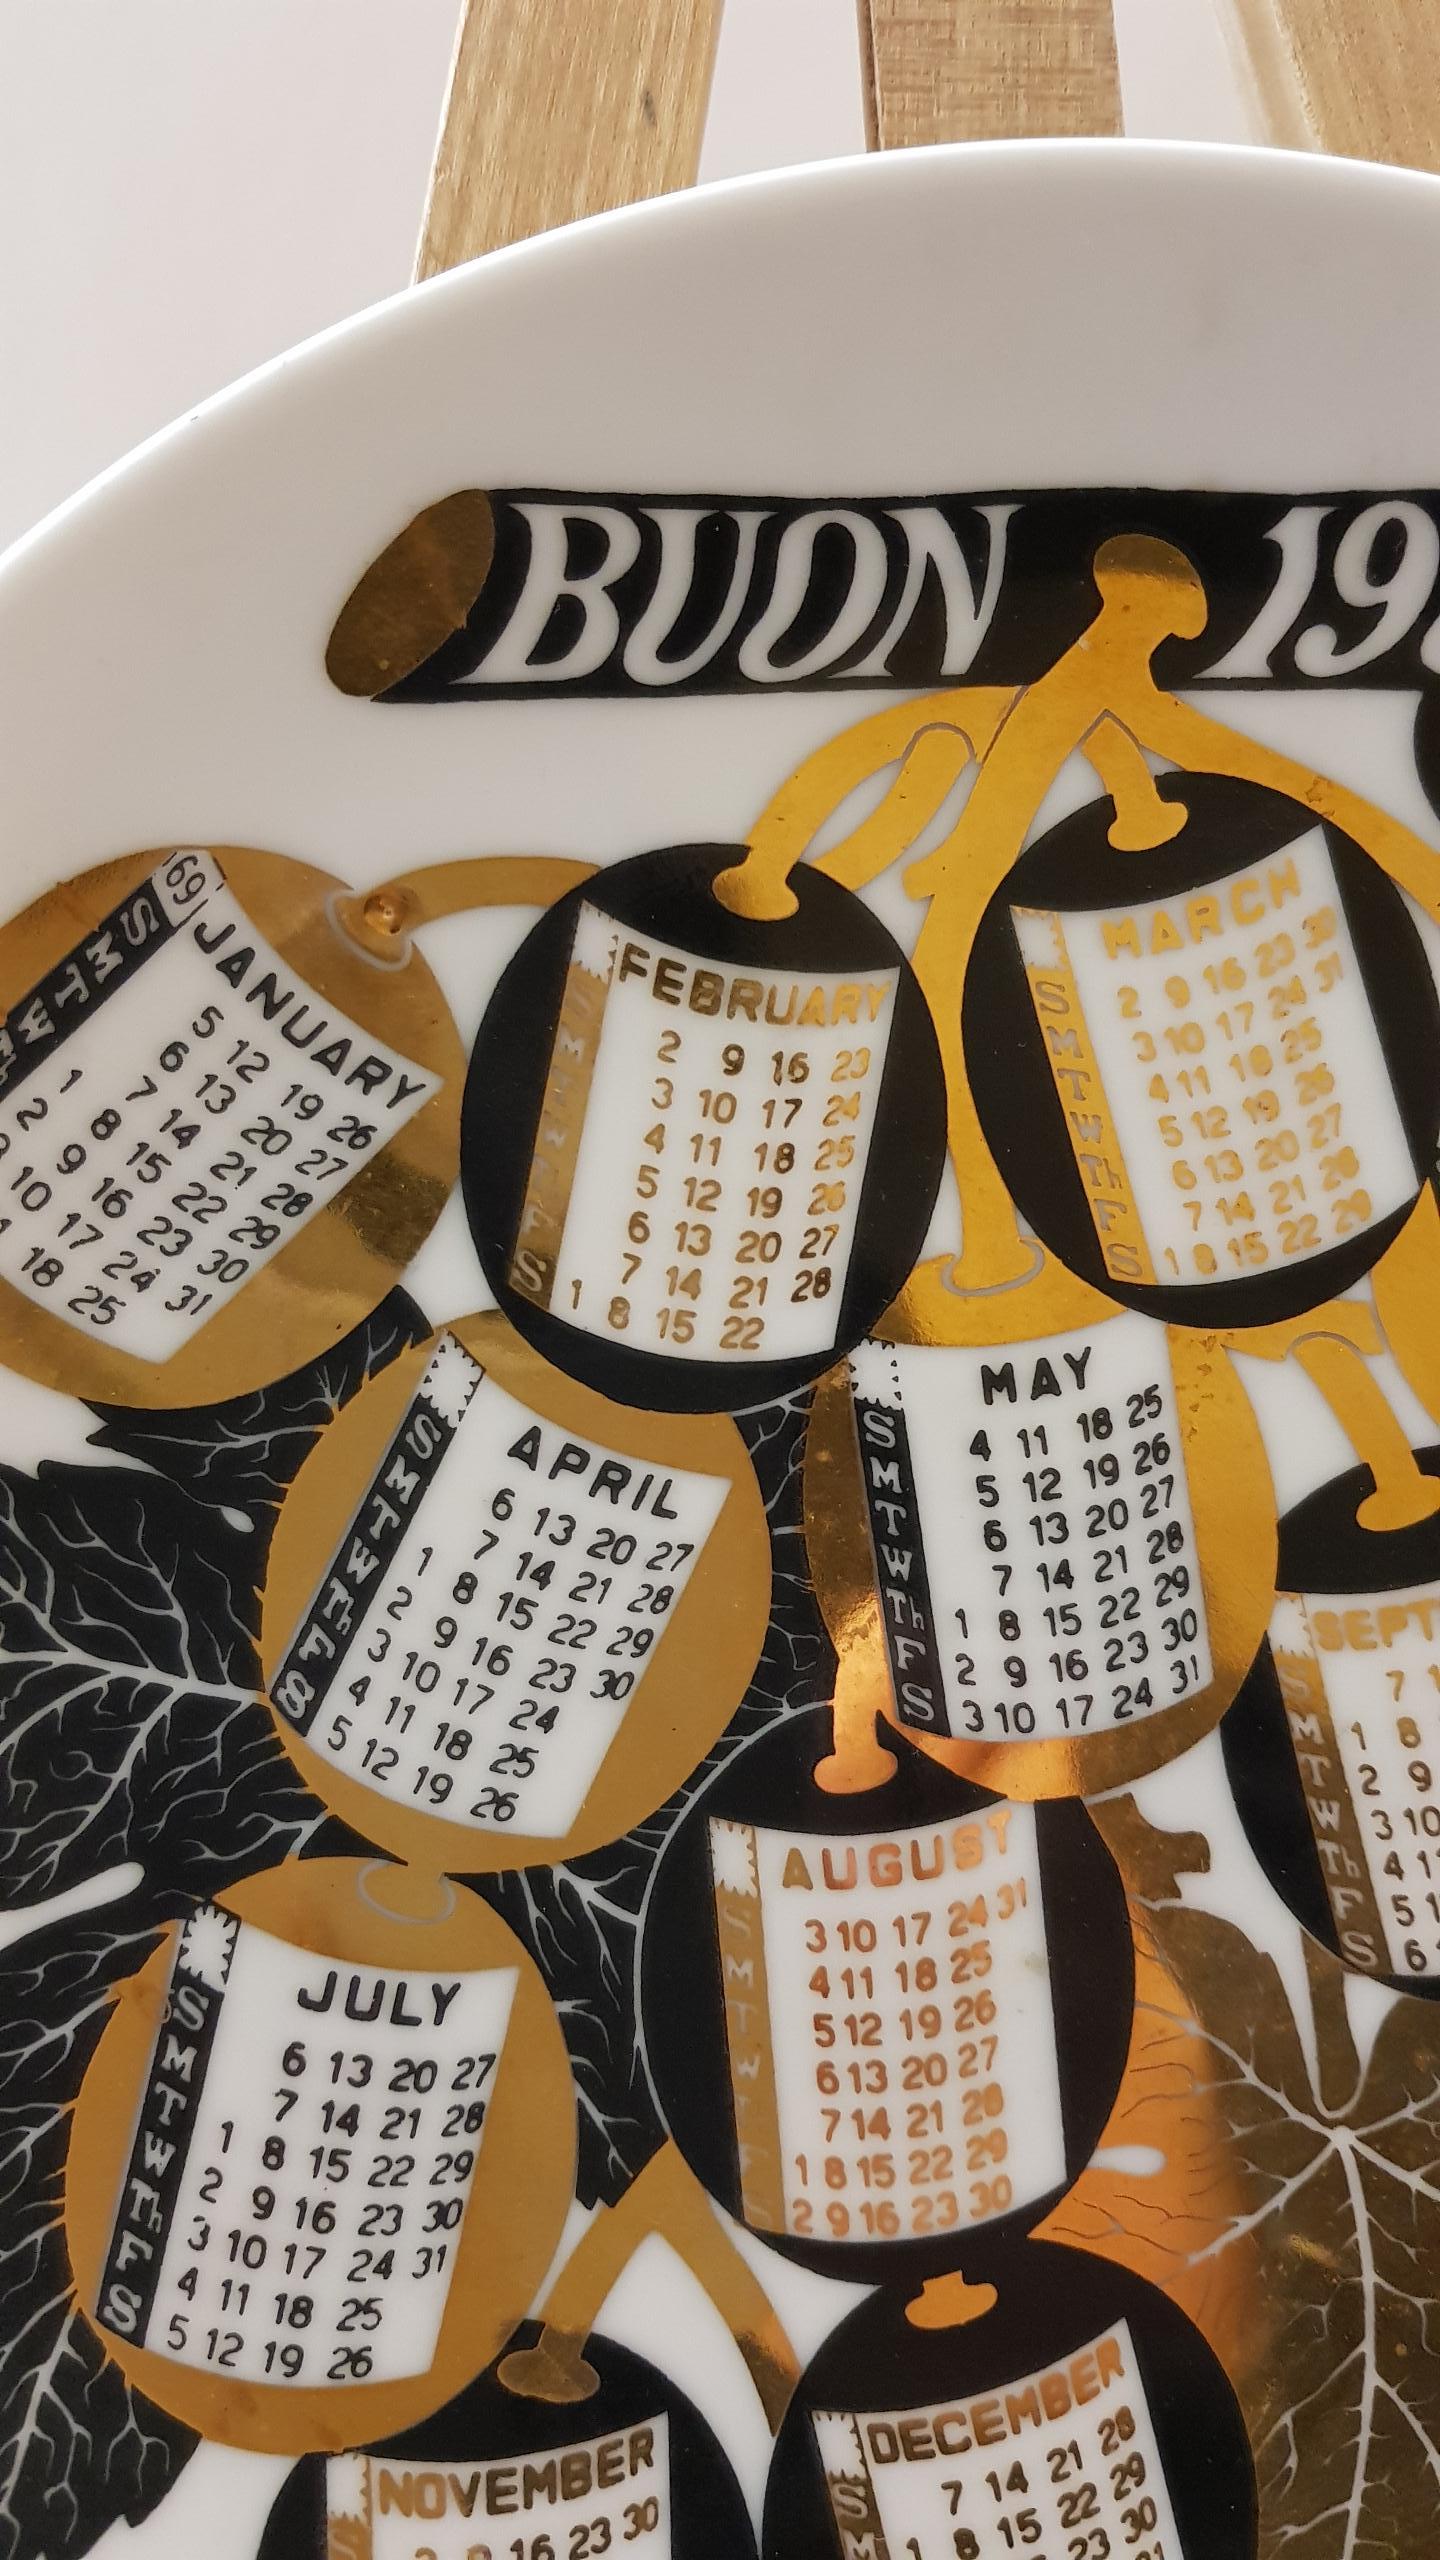 Calendar dish with calendar decoration of 1969
marked.